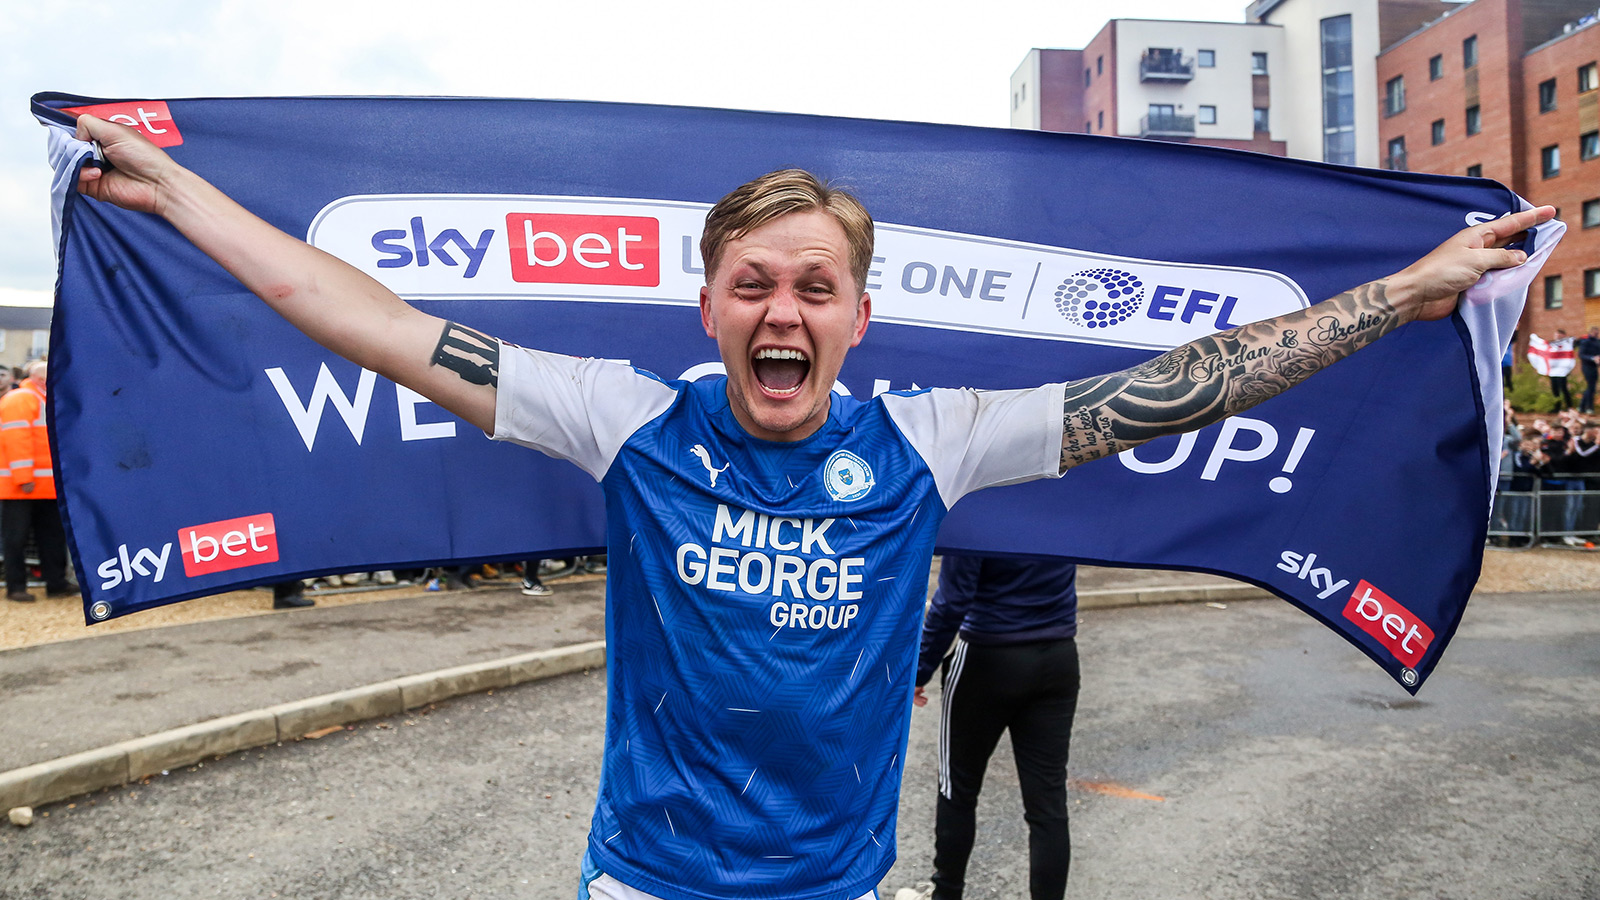 1st May '21 | Frankie Kent's emotion sums up everyone connected to Peterborough United on that memorable day!